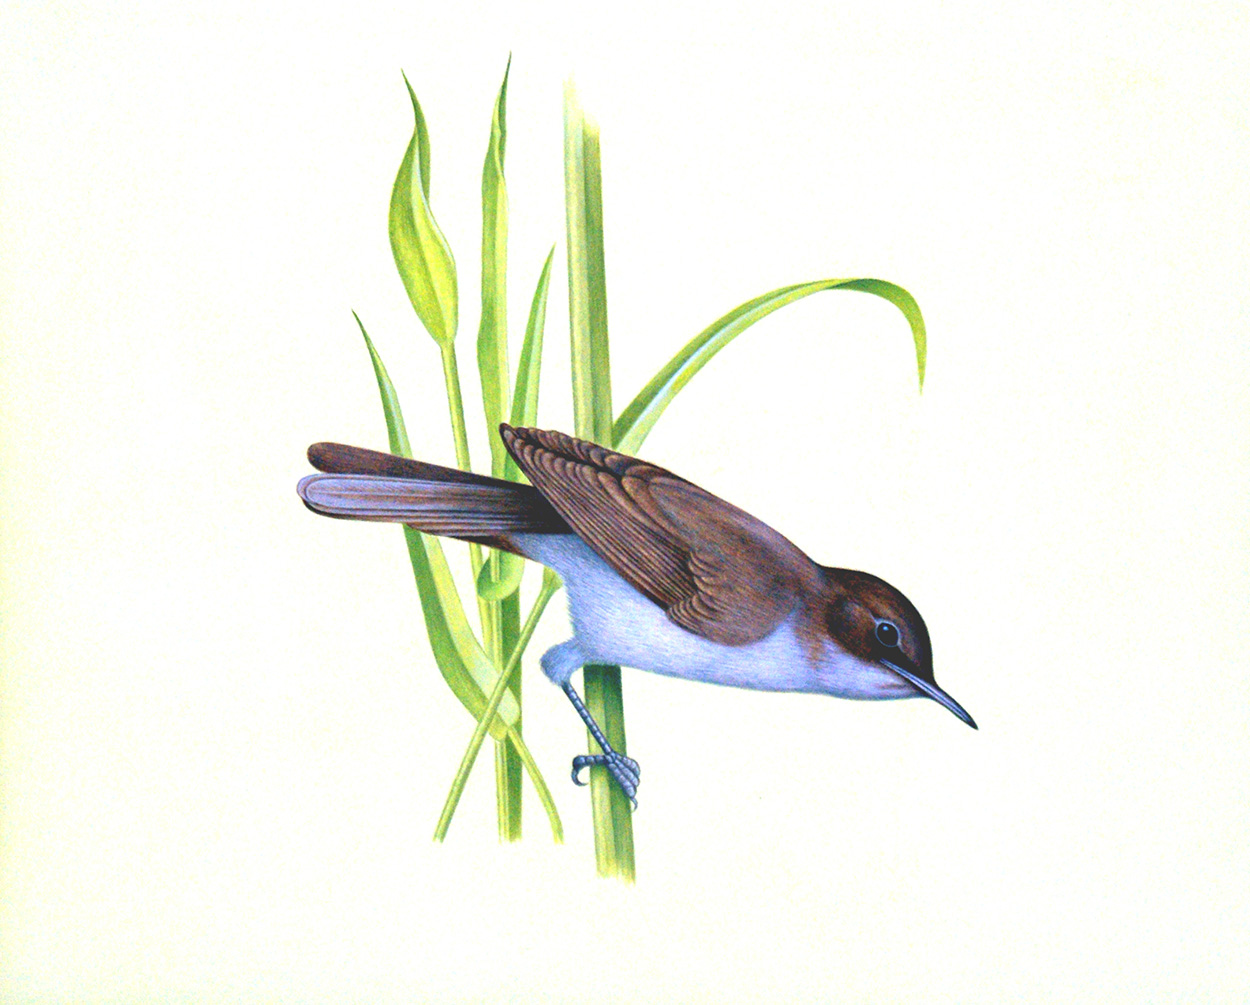 Reed Warbler (Original) art by Michael Hopkins at The Illustration Art Gallery